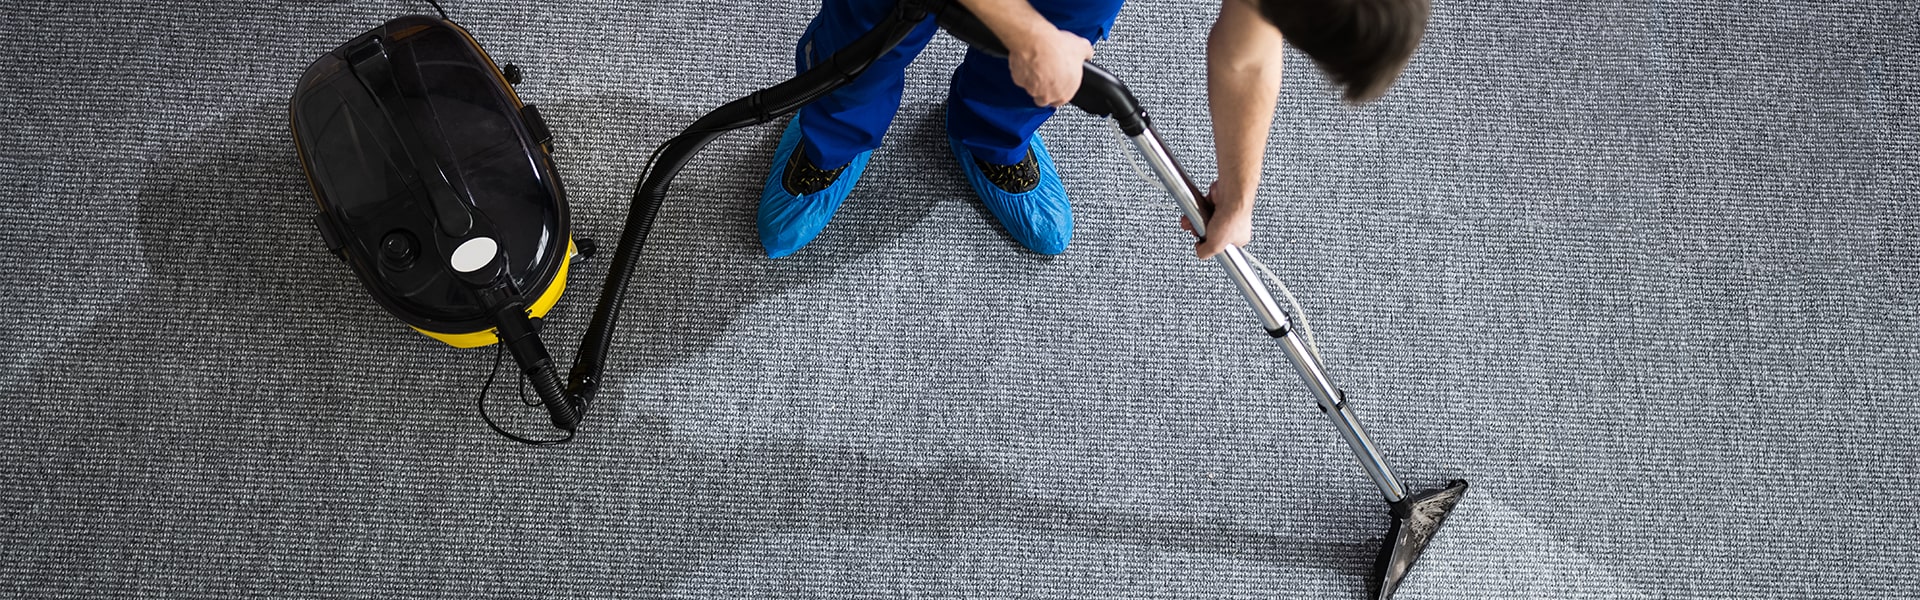 Carpet Cleaning for Commercial Buildings: Benefits, Methods, and FAQs